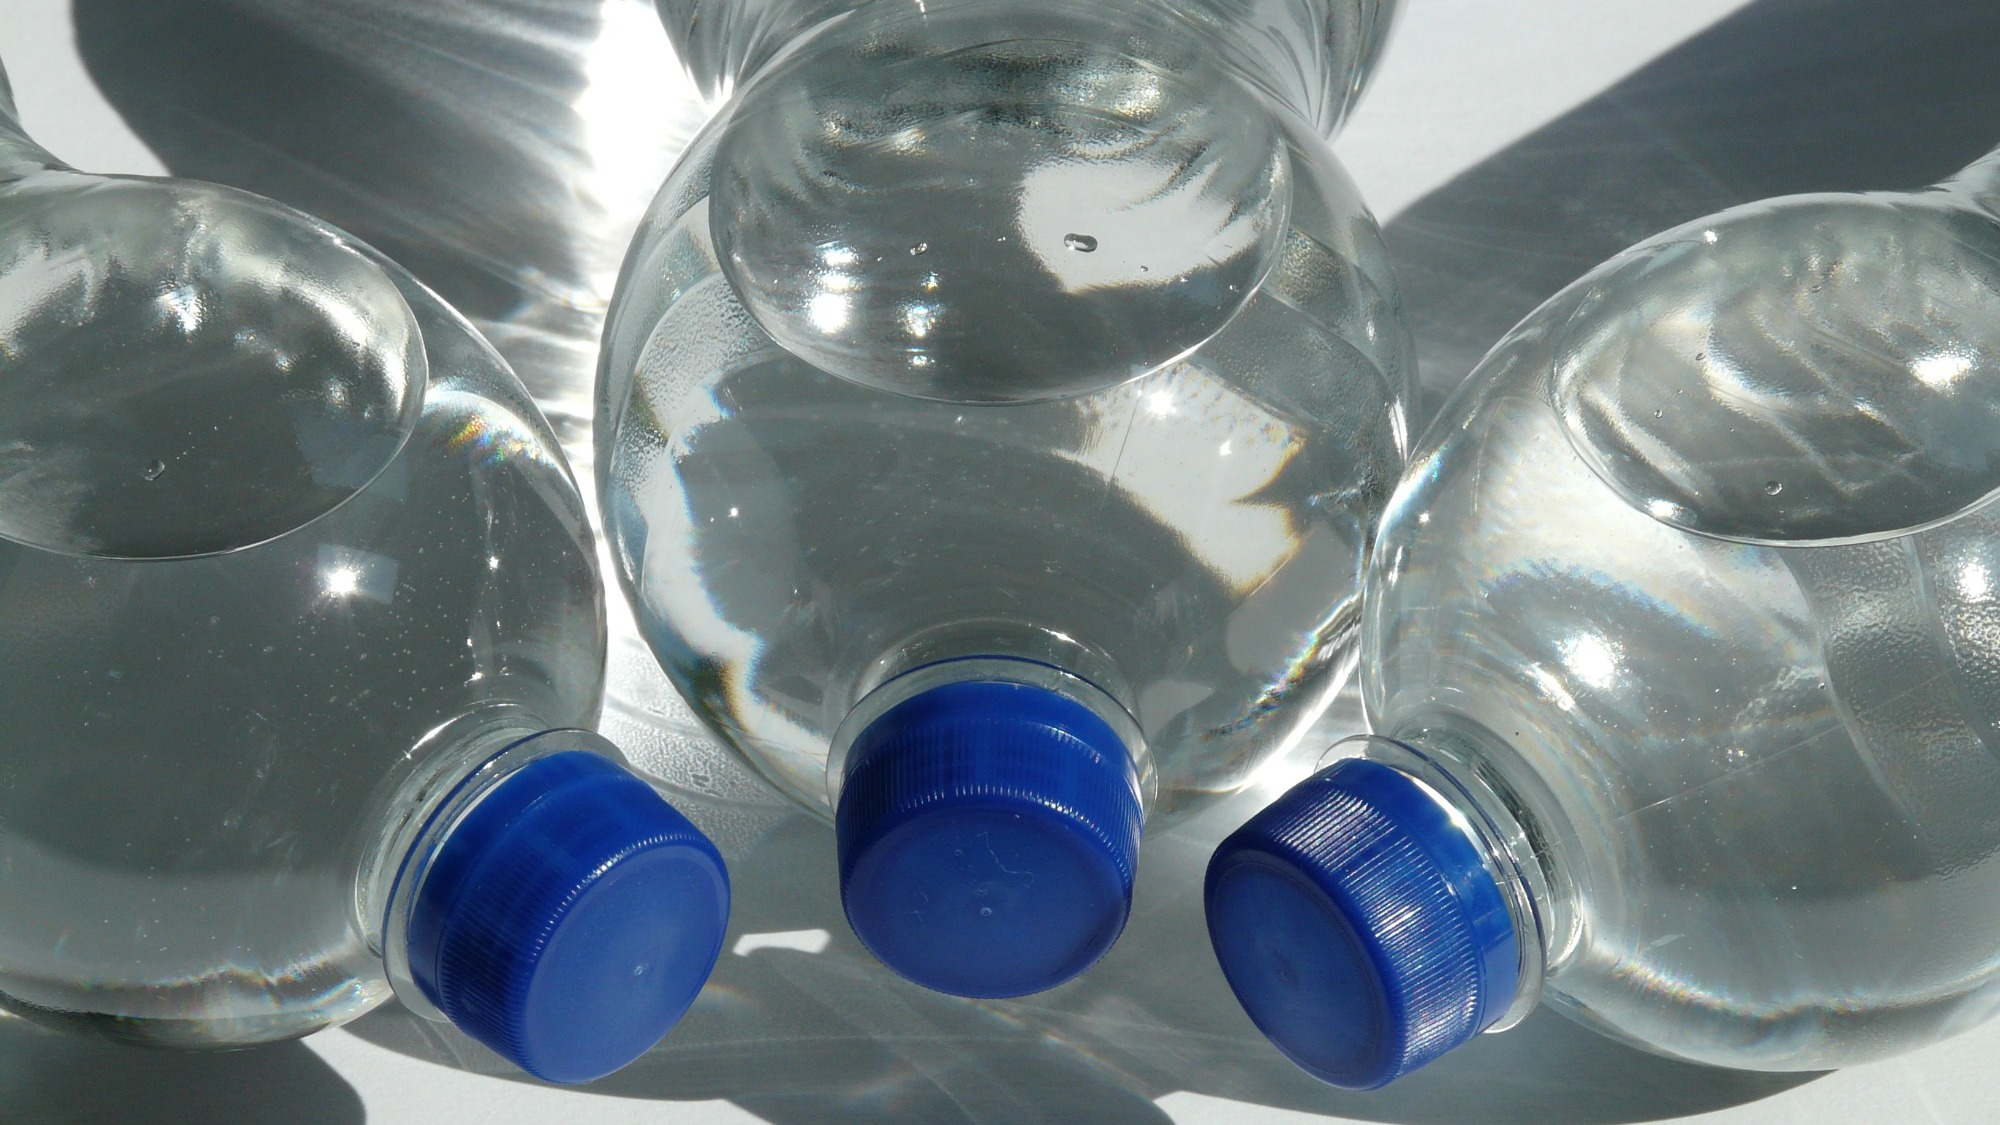 Currently, the global bottled water market is worth $270 billion.